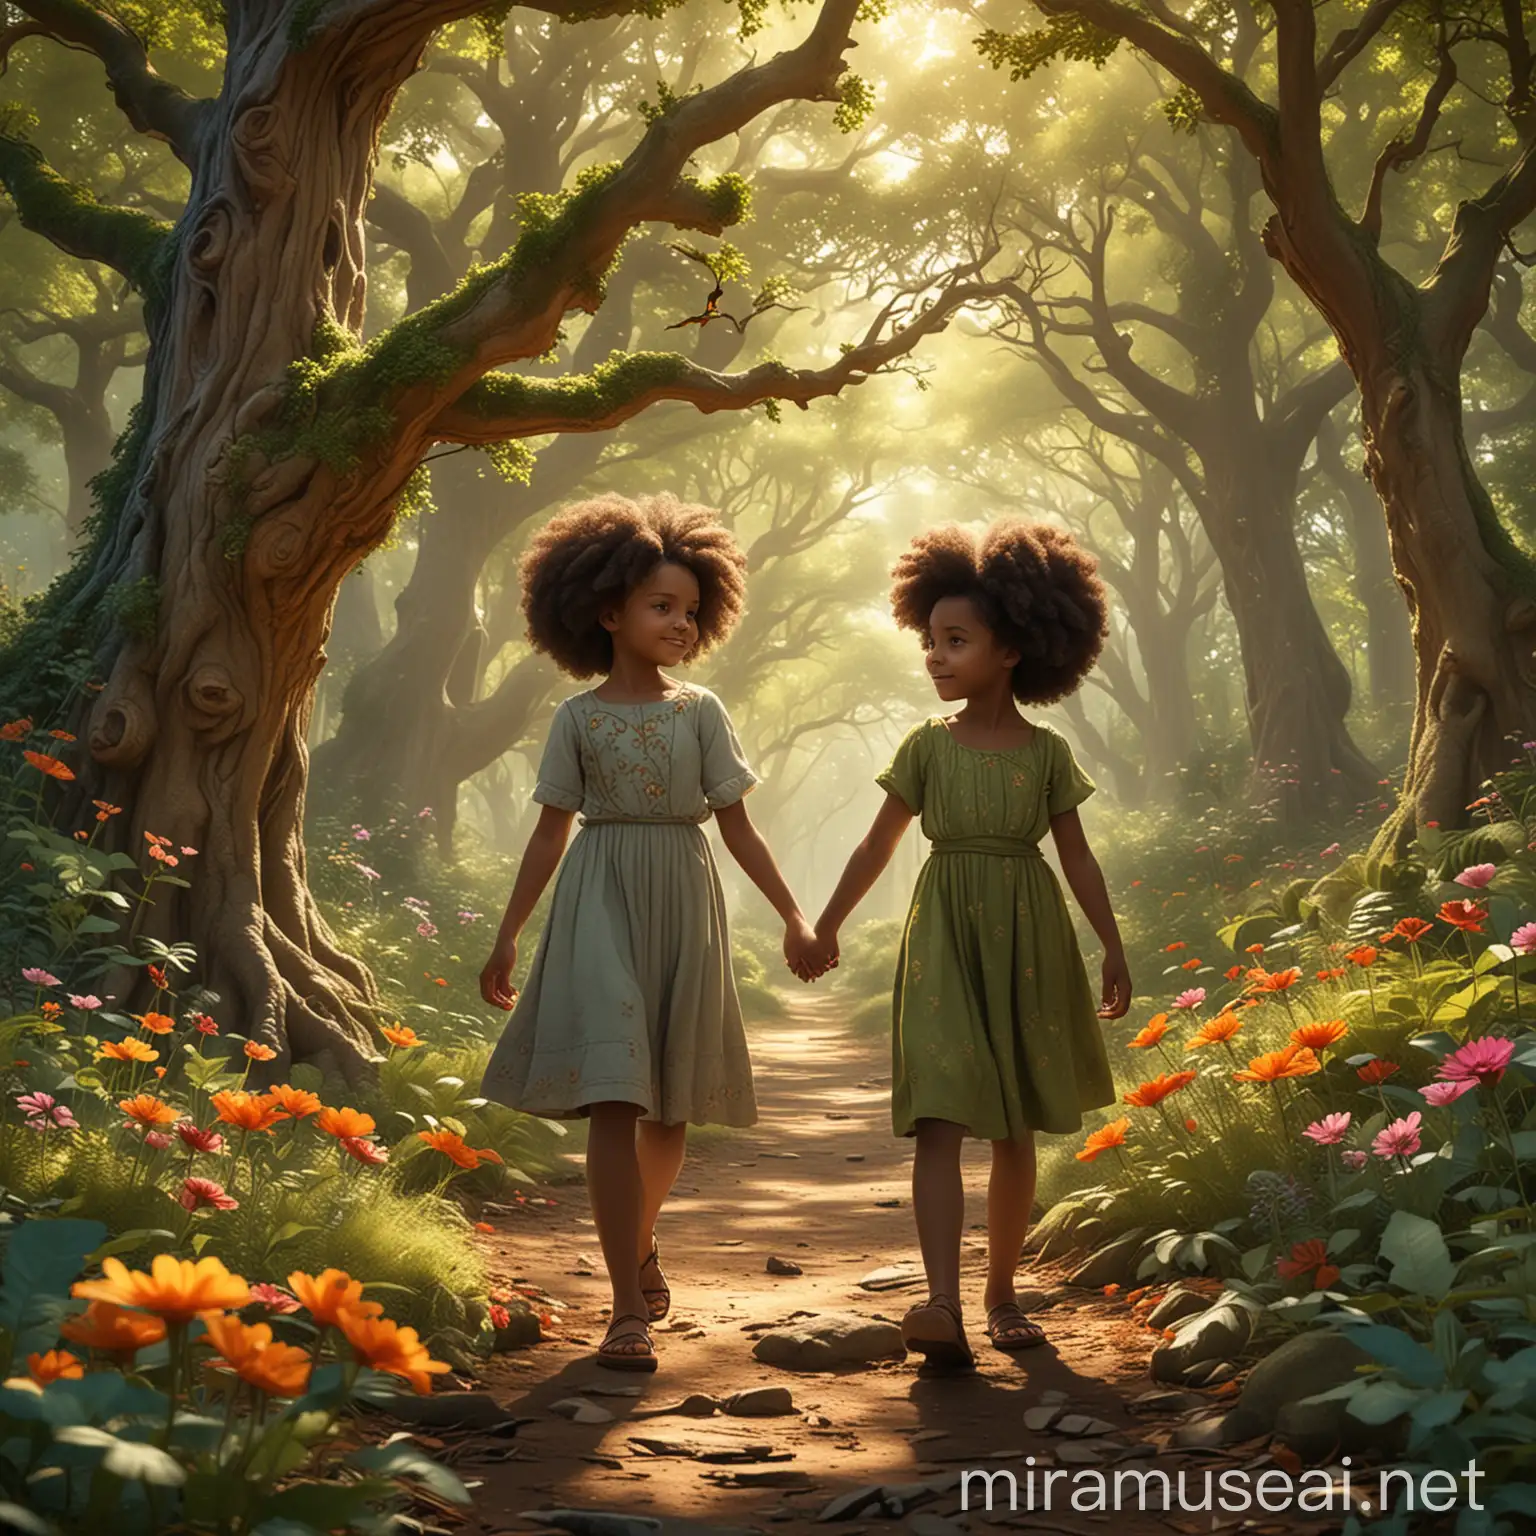 Sisters Djenna and Djoelia Explore a Magical Forest with Wise Tortoise Tilly